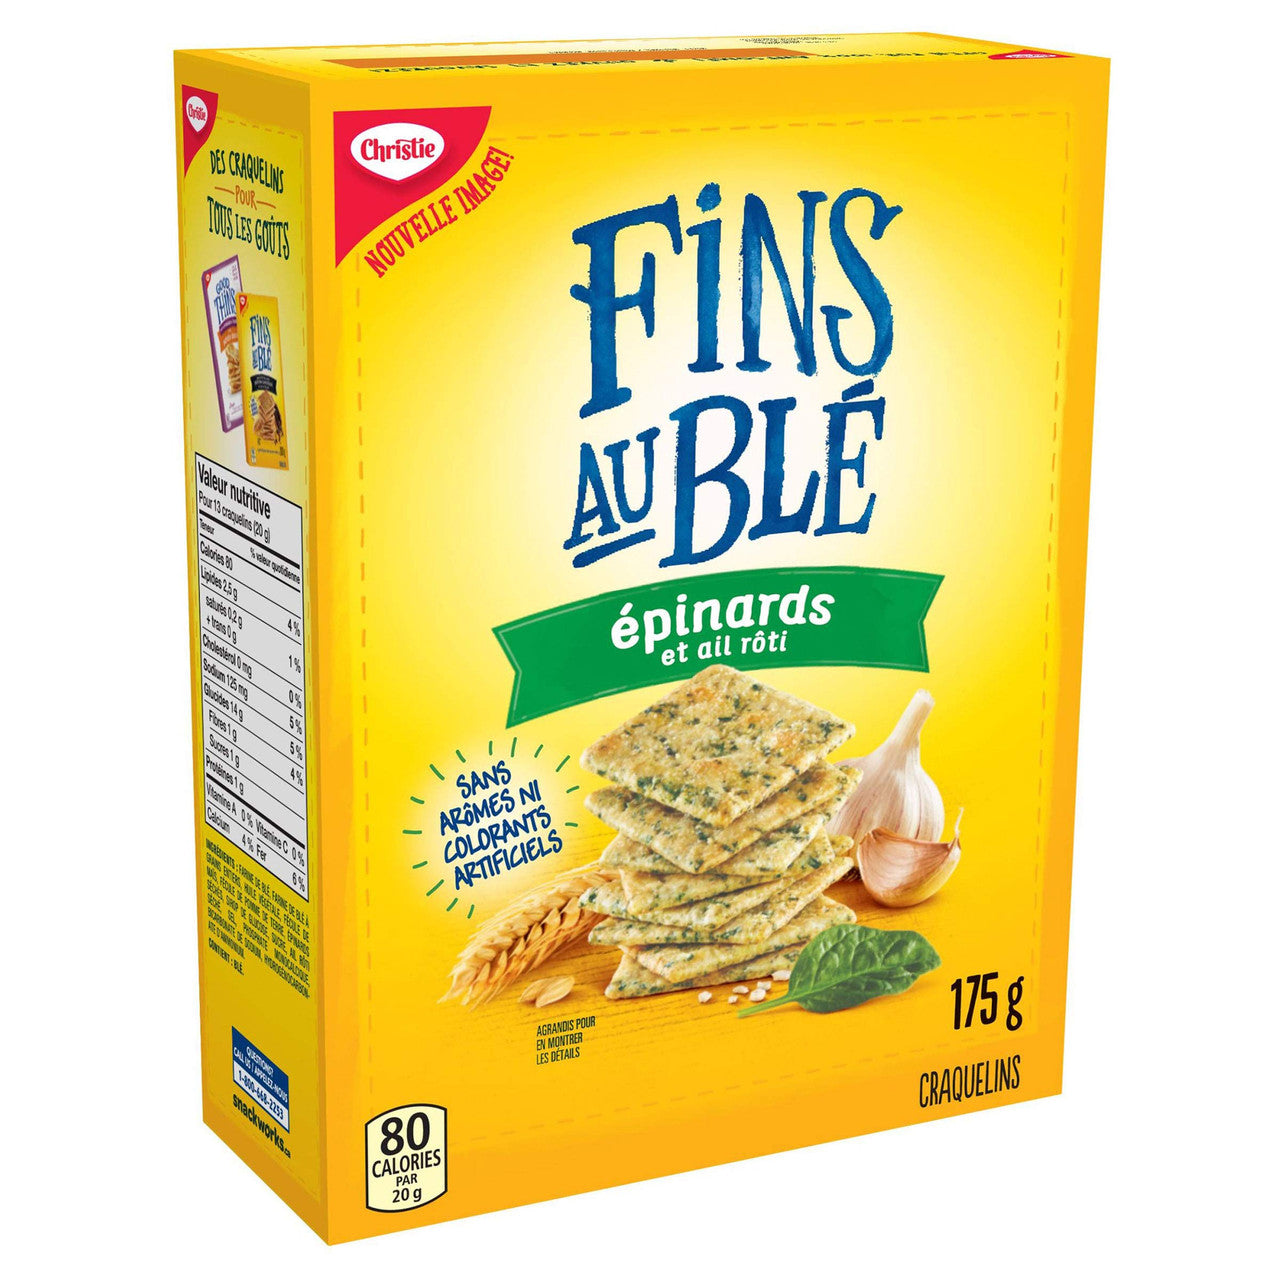 Christie Wheat Thins Spinach & Roasted Garlic Crackers, 175g/6.2 oz., (Imported from Canada}